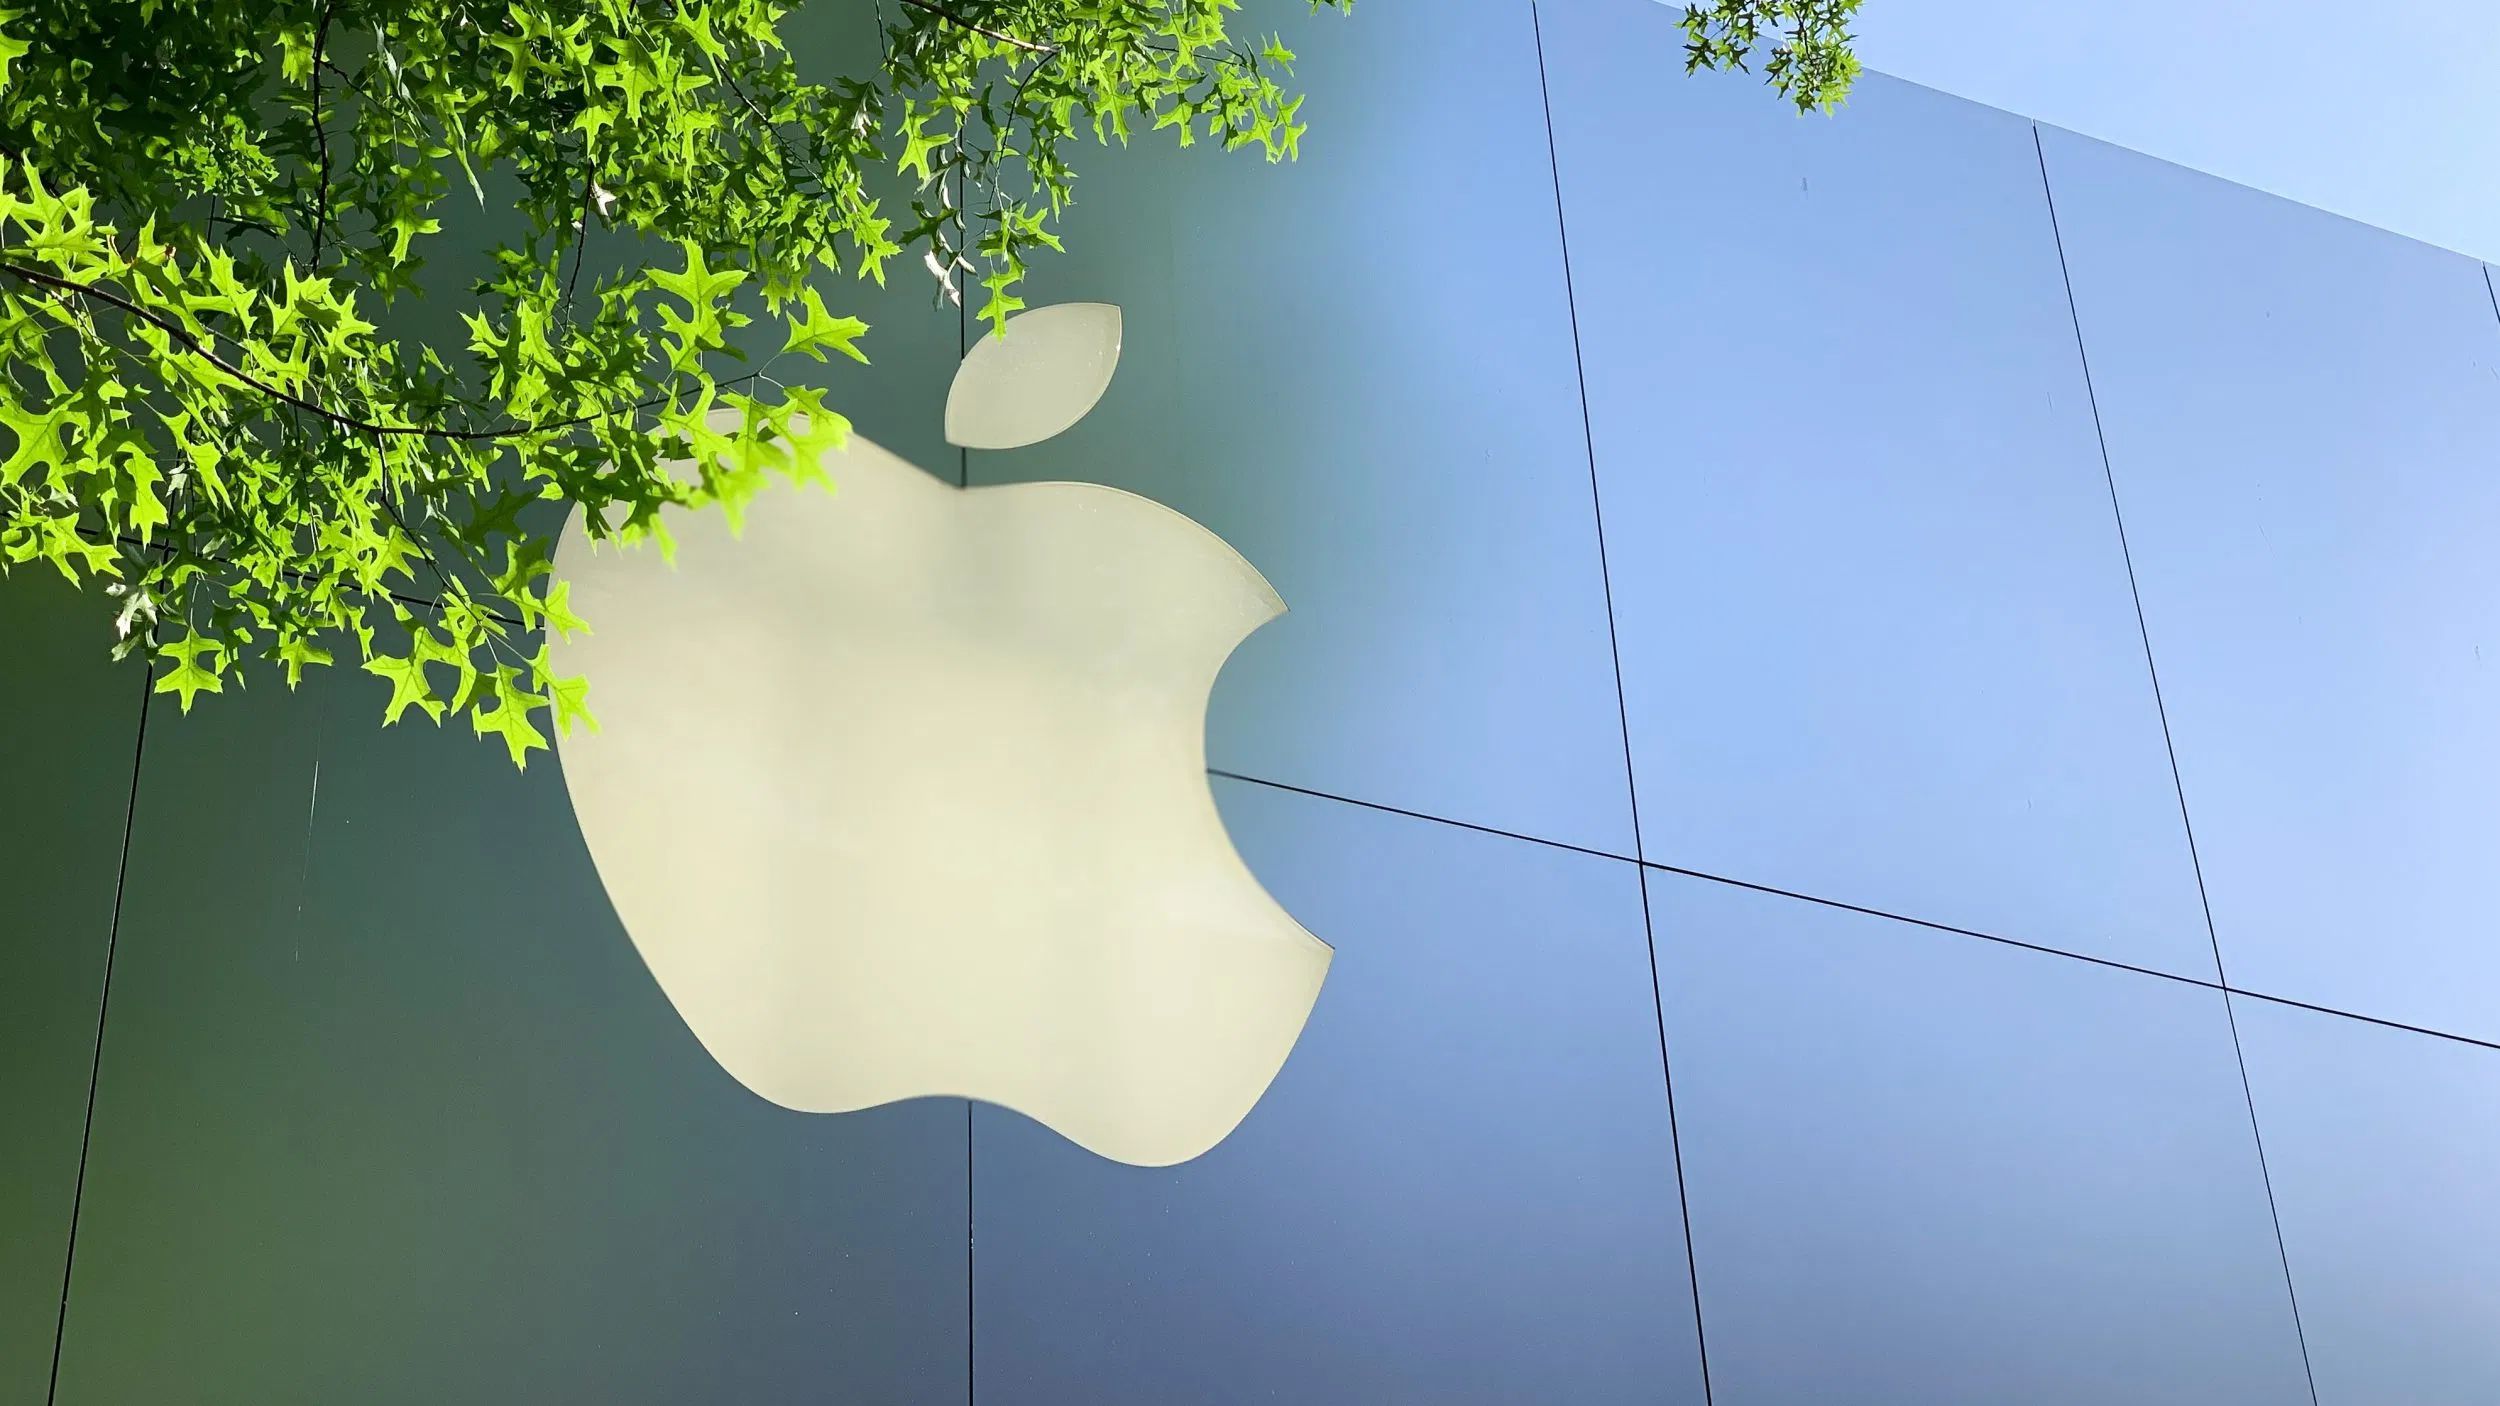 Apple Planning for ‘Staggered’ Reopening of Retail Stores Based on Local Conditions